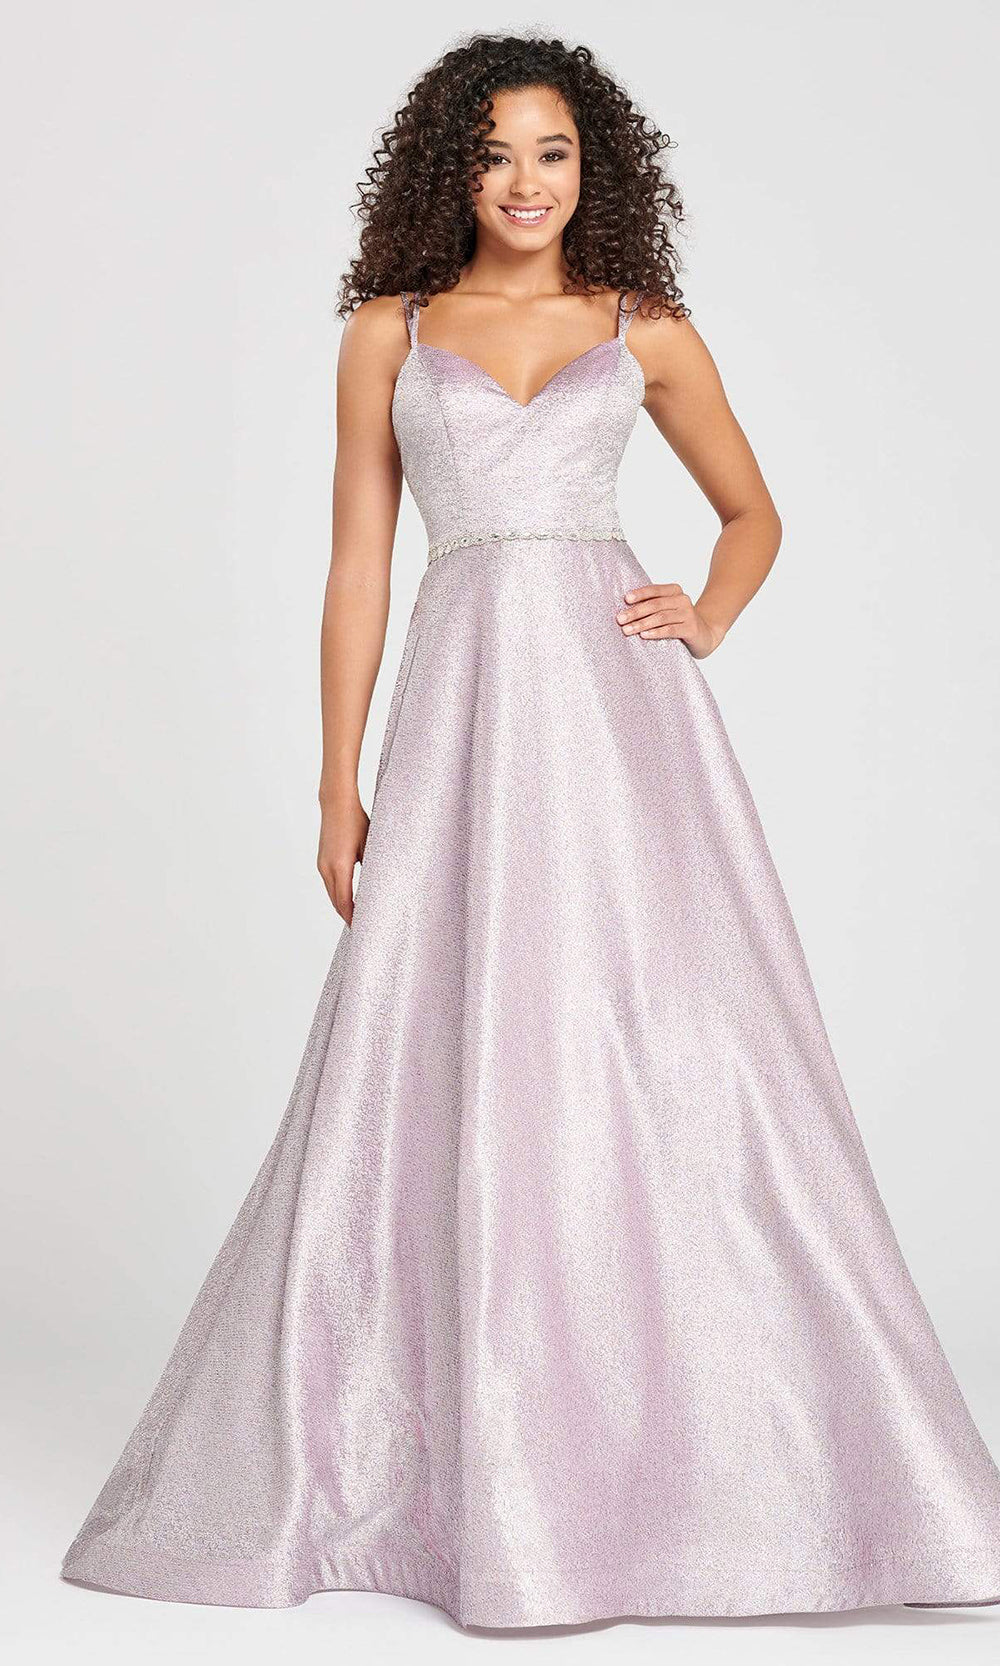 Colette for Mon Cheri - Sleeveless V-Neck A-Line Glitter Gown CL12004 - 1 pc Lilac In Size 20 Available CCSALE 20 / Lilac